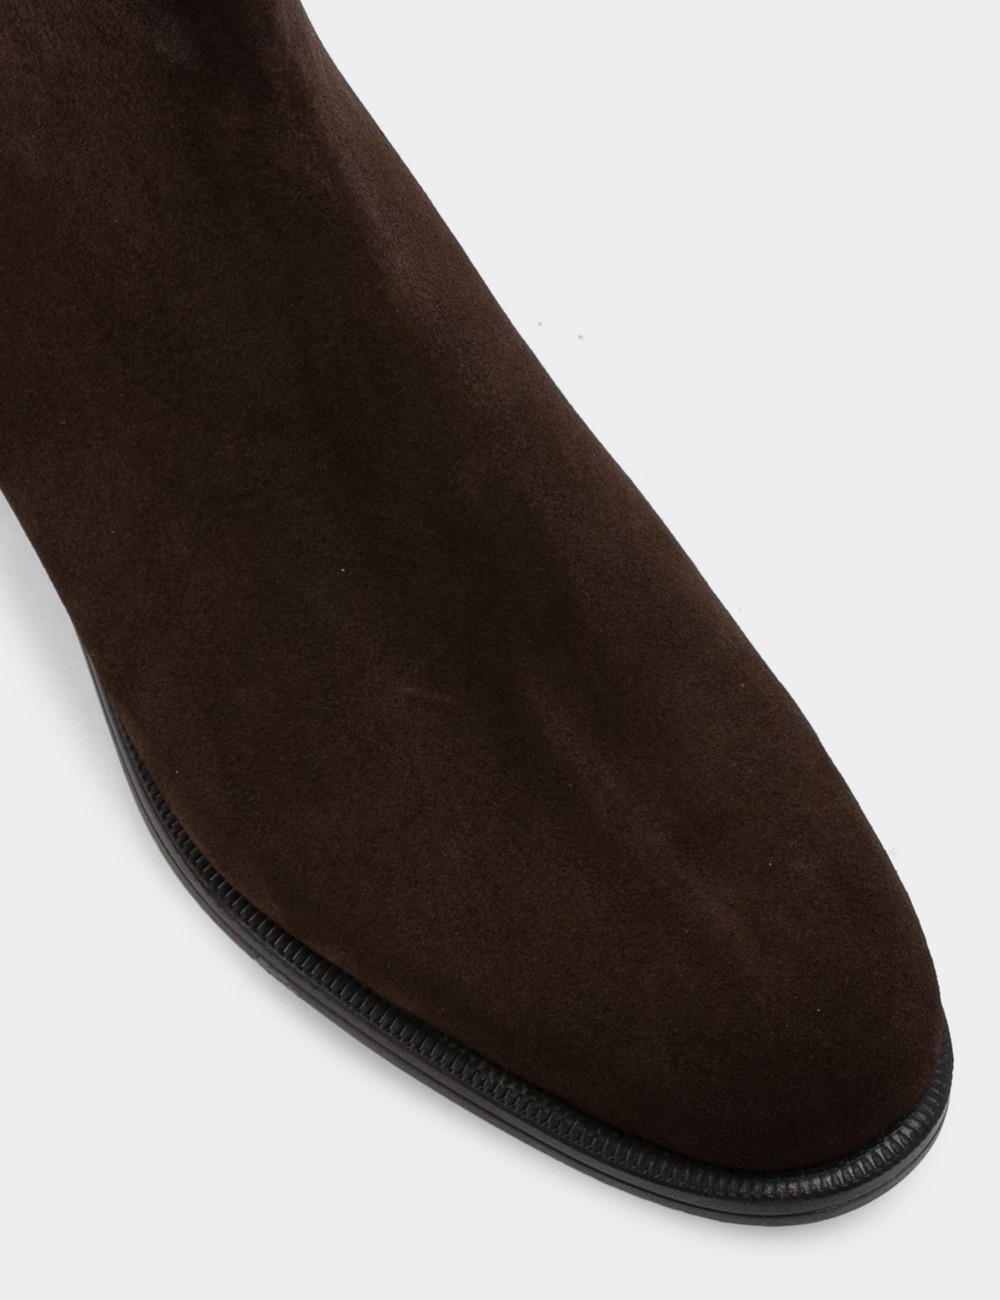 Brown Suede Leather Boots - 01921MKHVC02